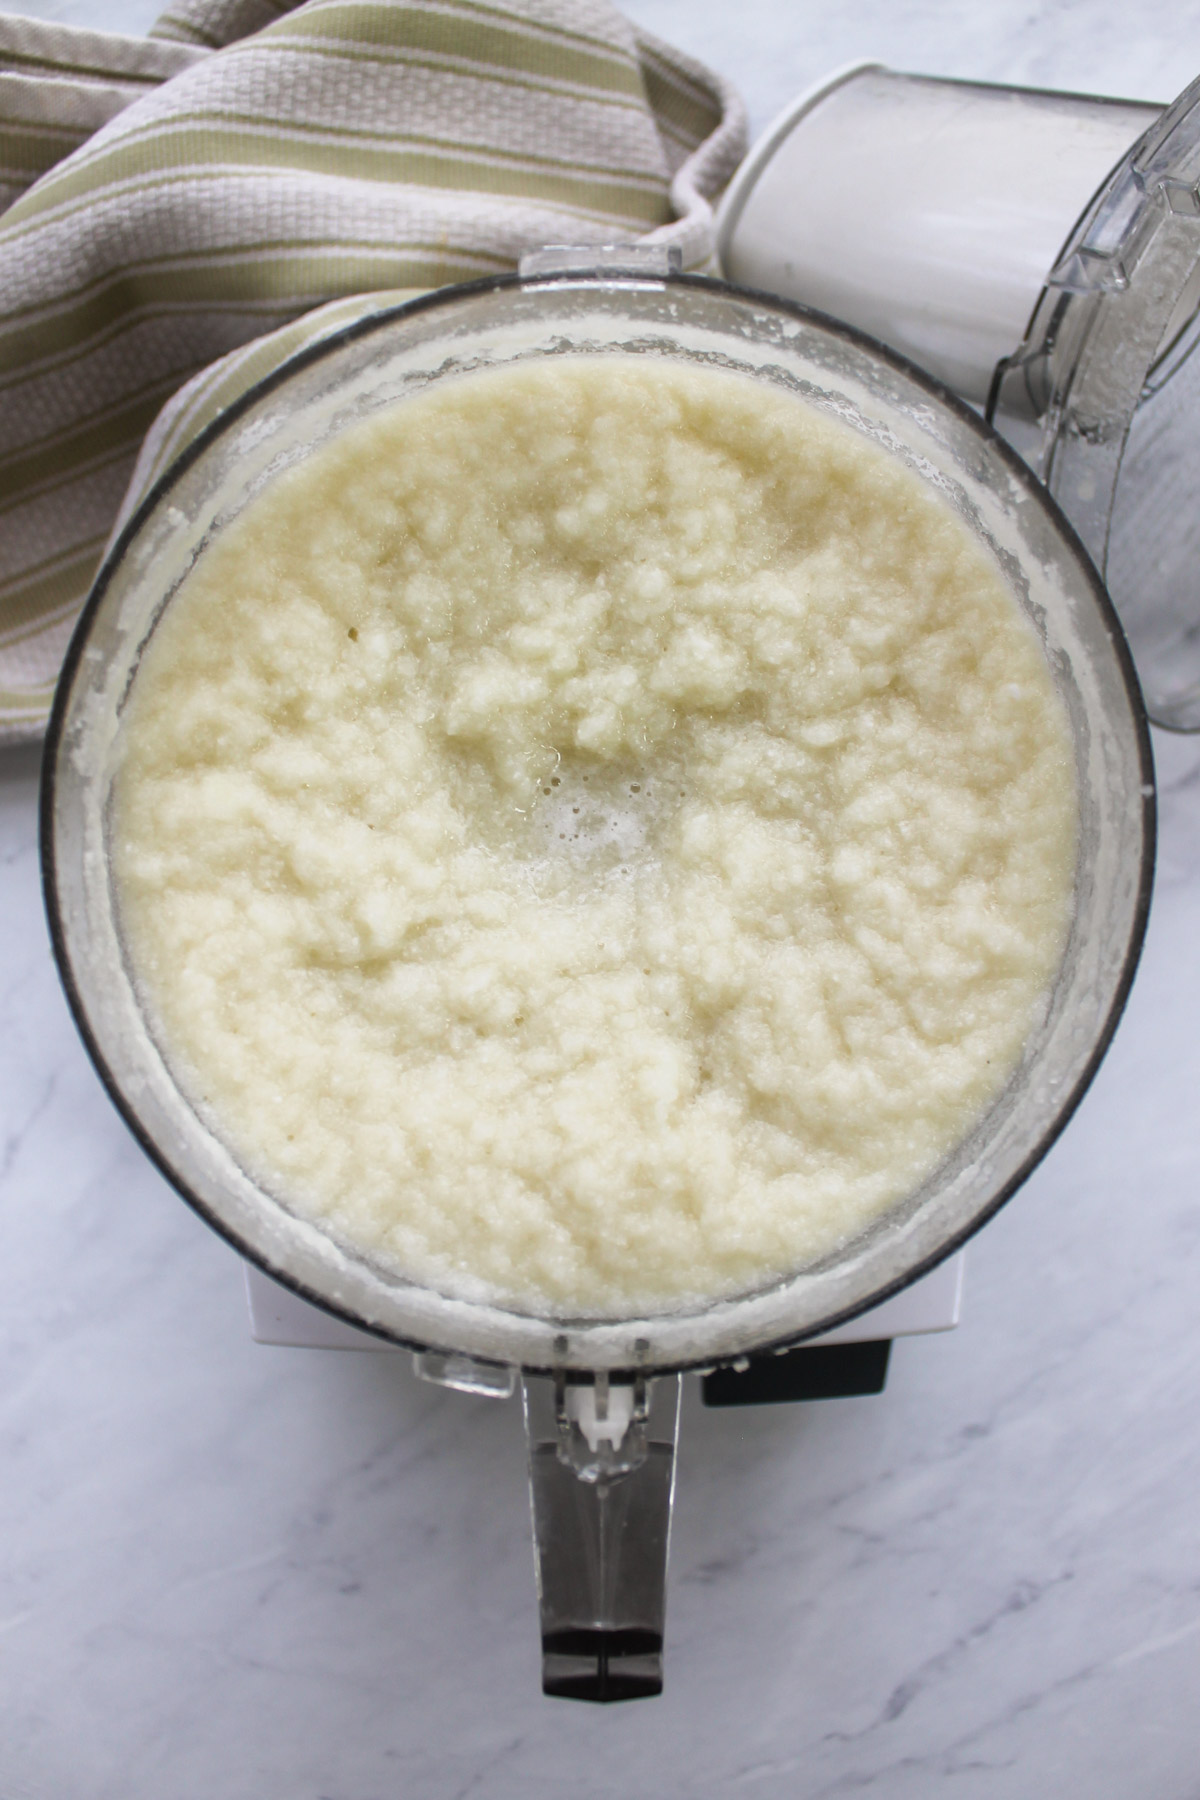 Pureed cauliflower in a food processor blended with water.